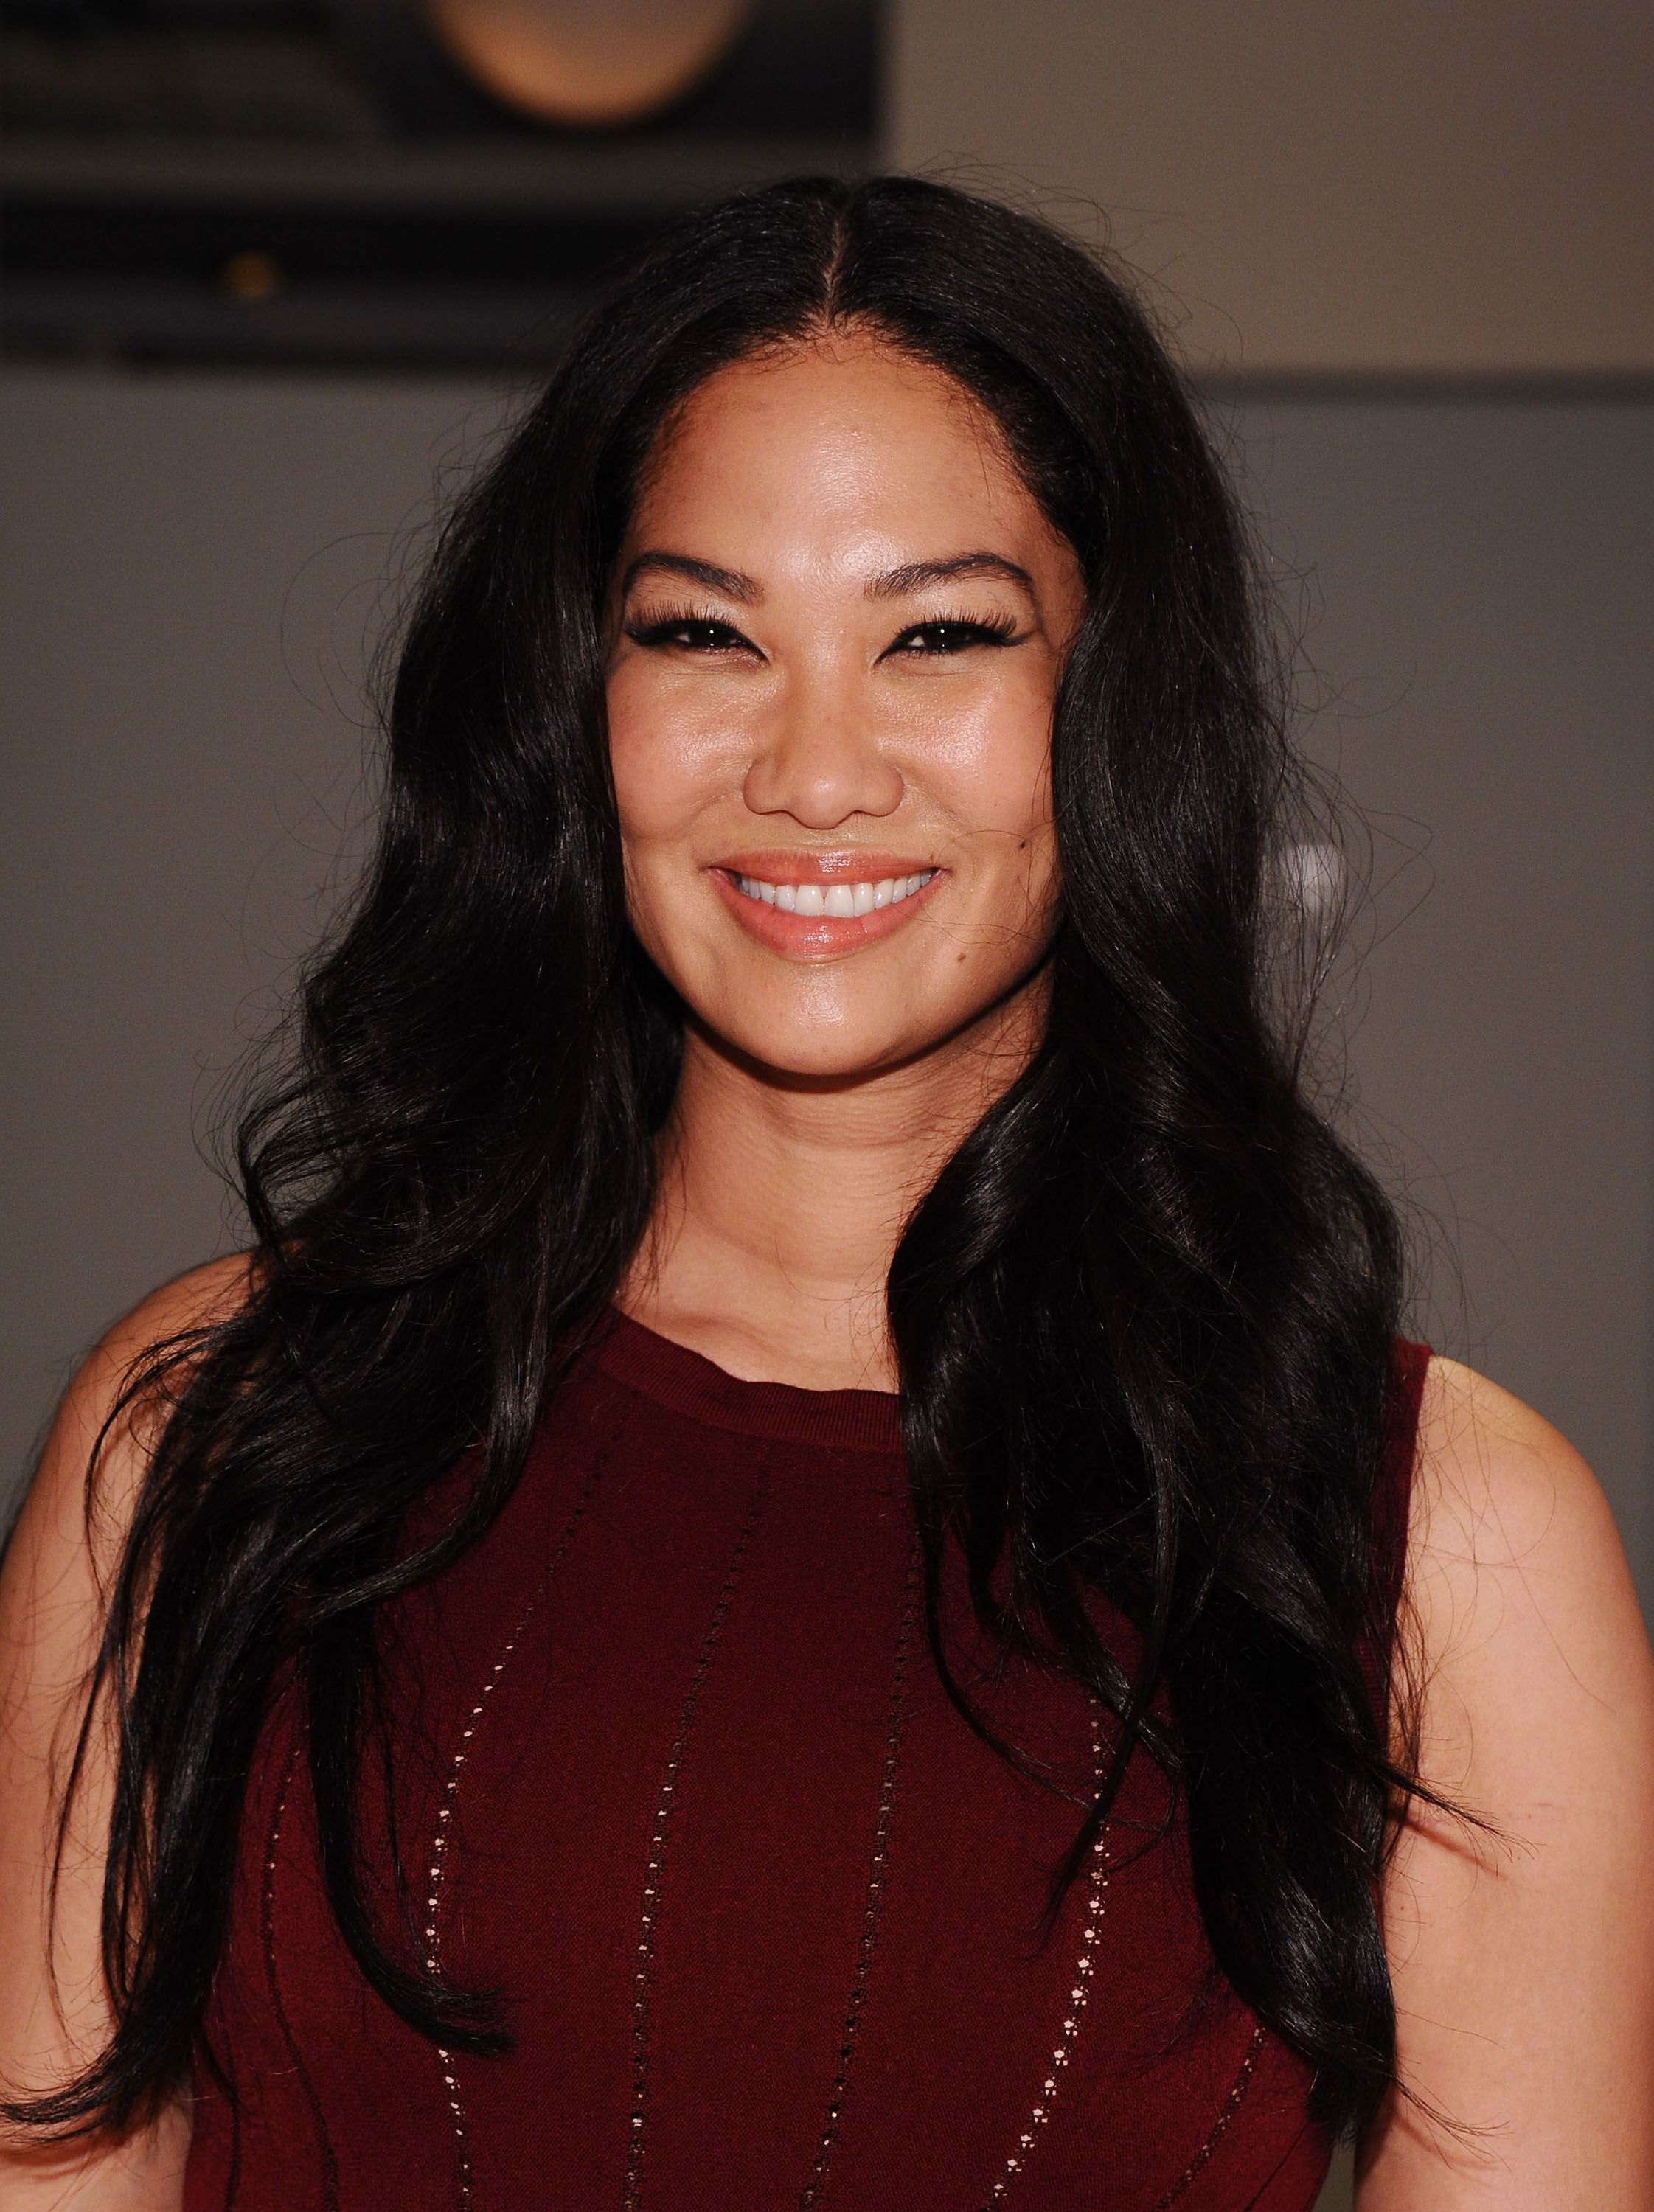 Kimora Lee Simmons at the Argyleculture By Russell Simmons fashion show during Mercedes-Benz Fashion Week Spring 2015 at Helen Mills Event Space on September 5, 2014 in New York City. | Photo: Getty Images